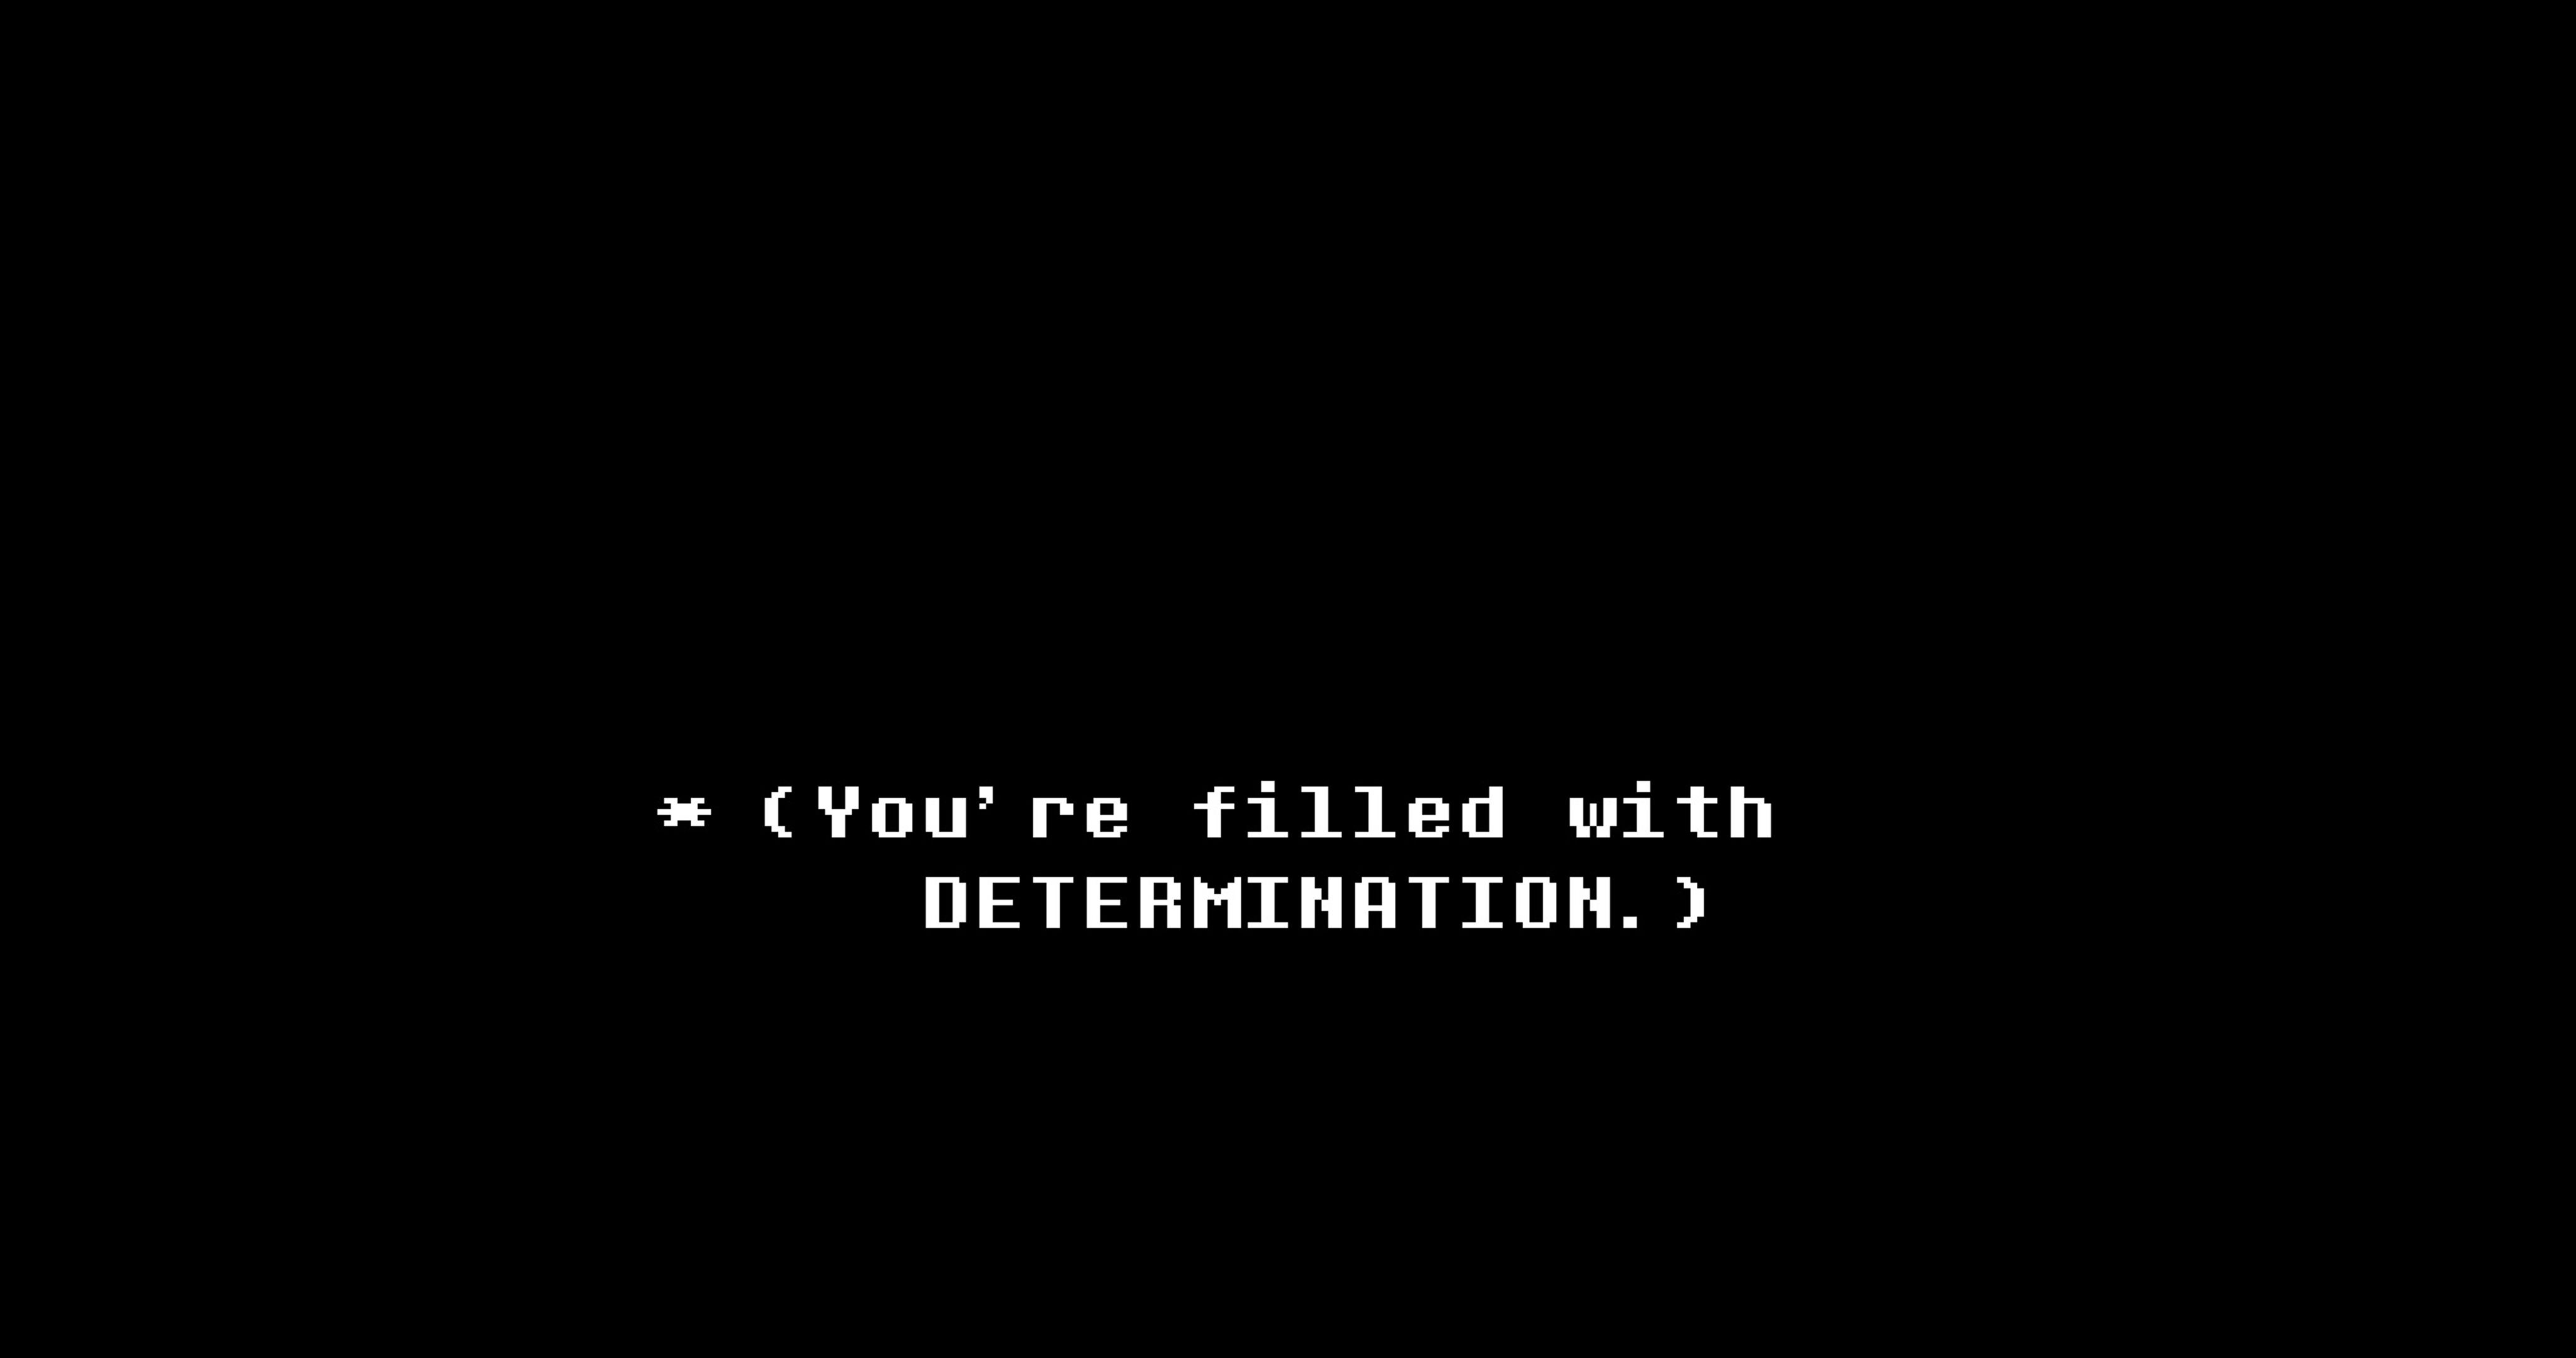 Can we get a You're filled with DETERMINATION wallpaper?